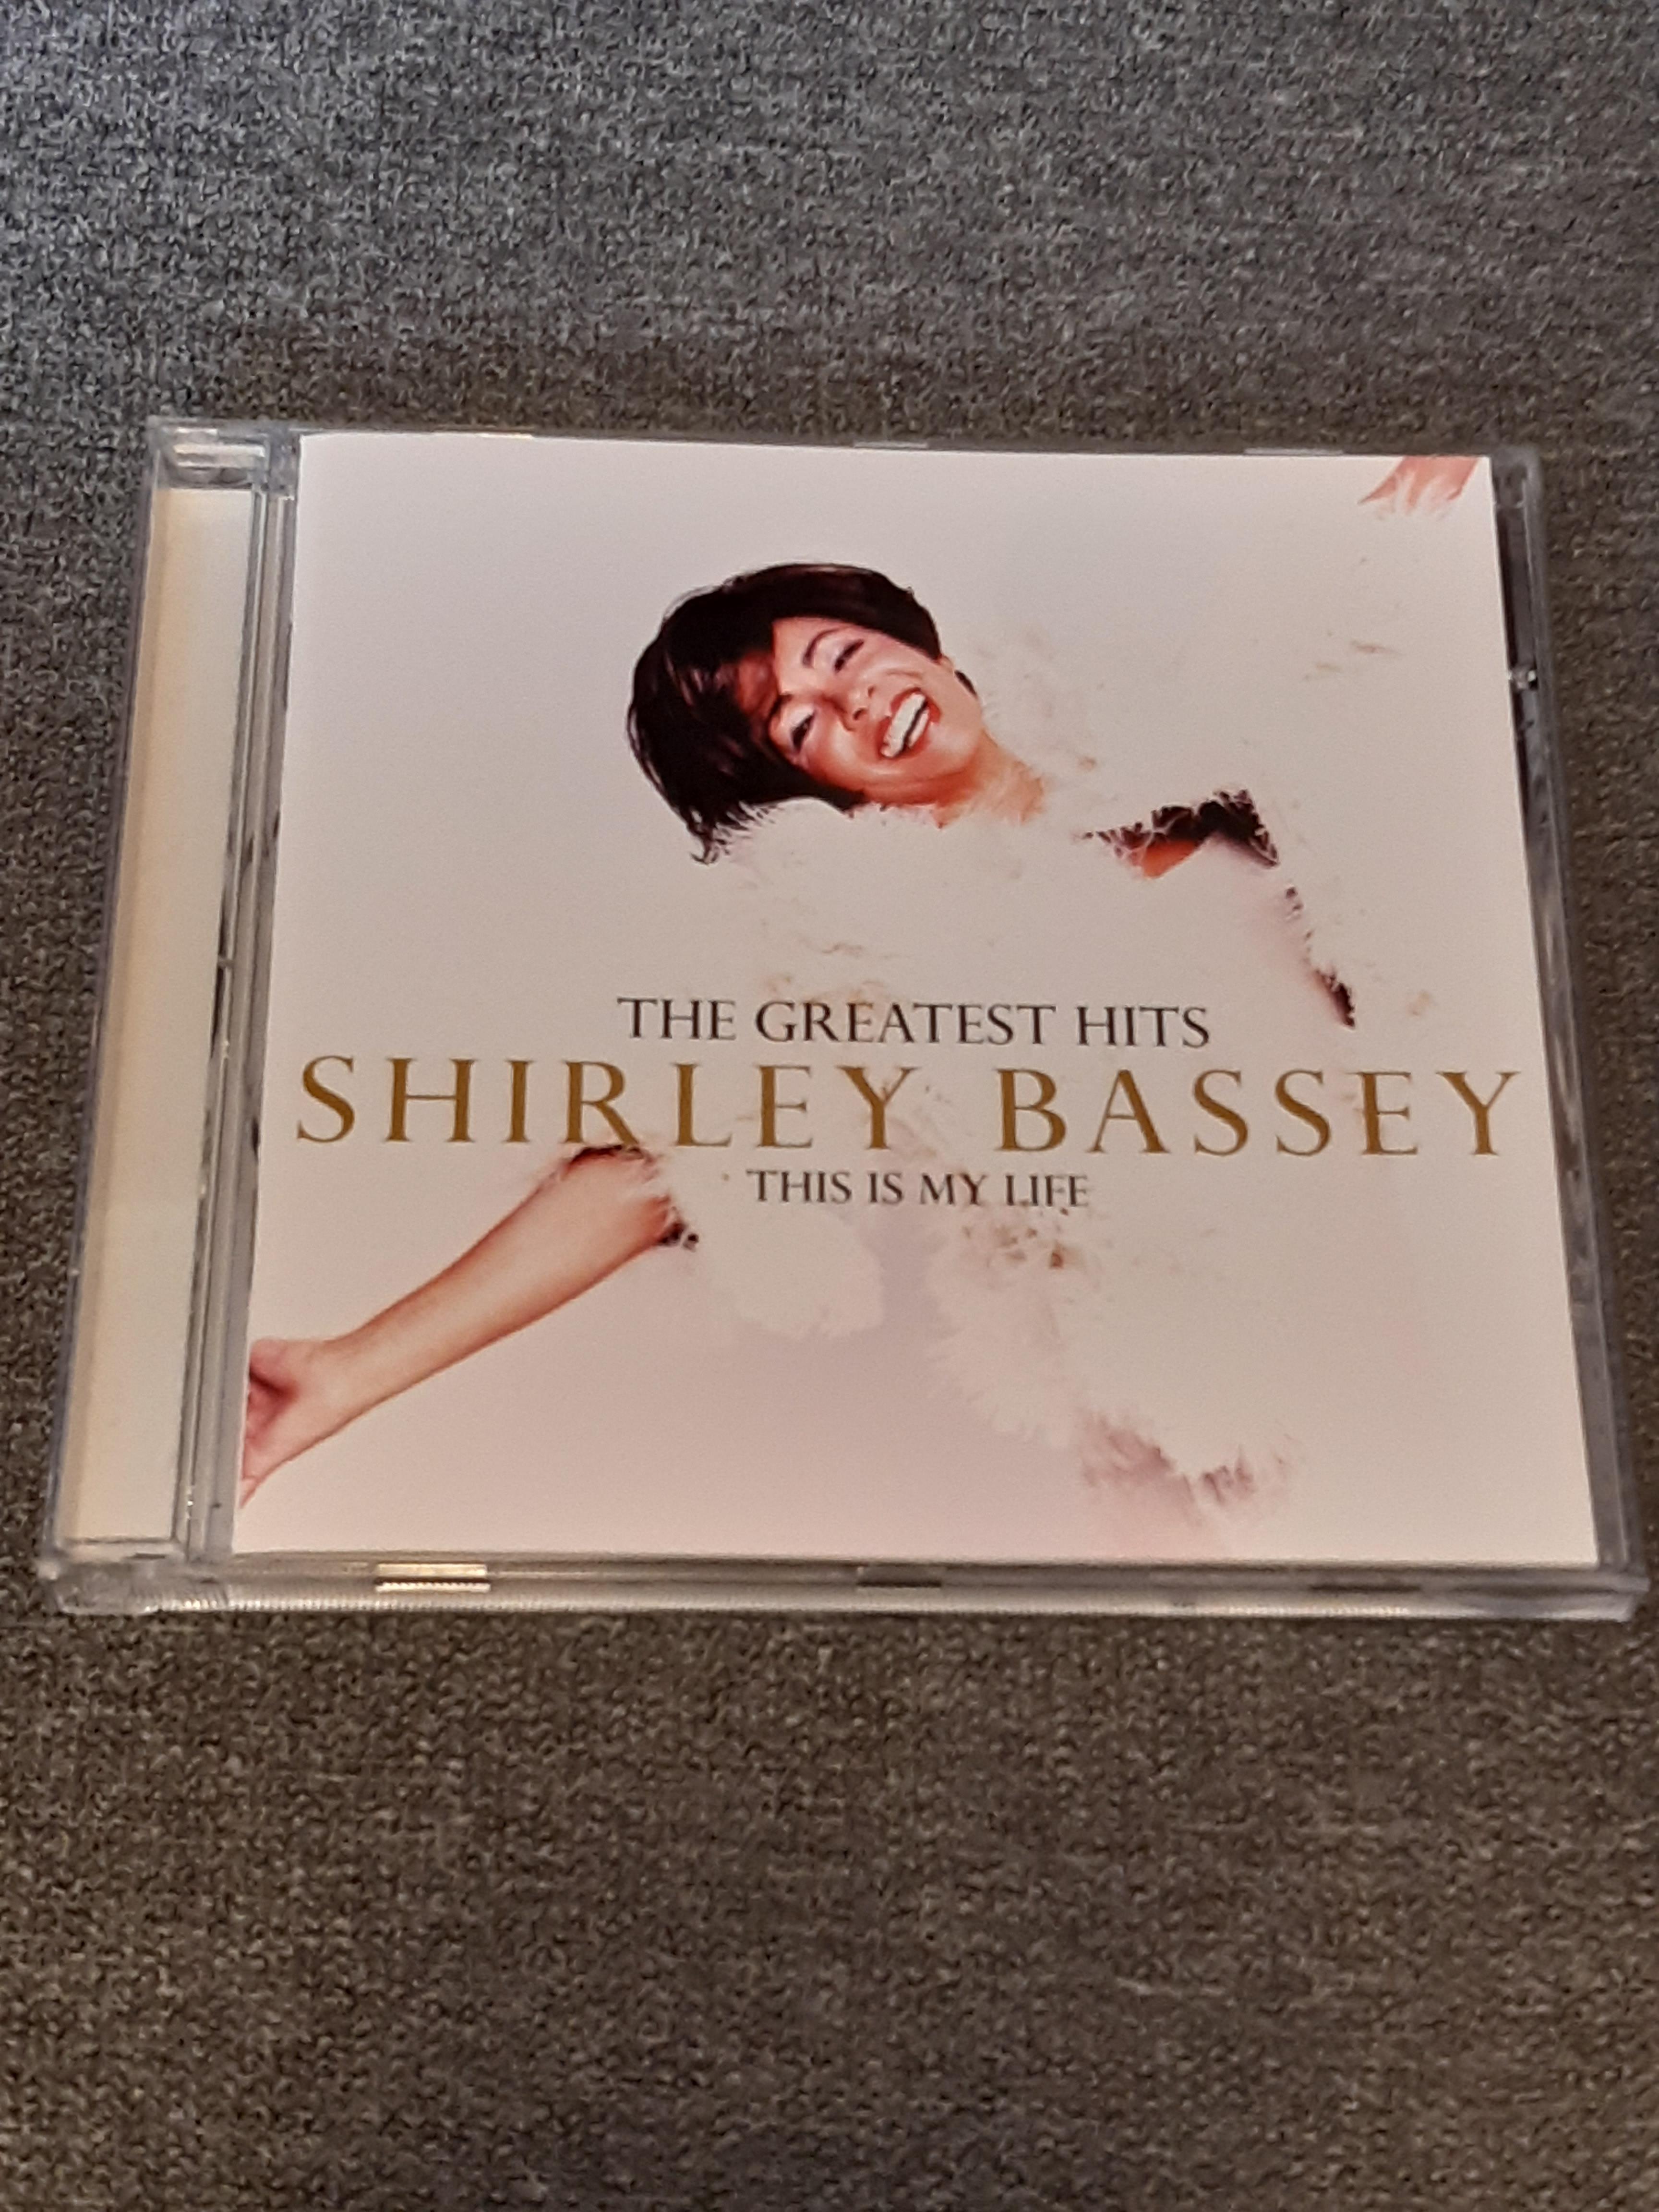 Shirley Bassey - The Greatest Hits, This Is My Life - CD (käytetty)